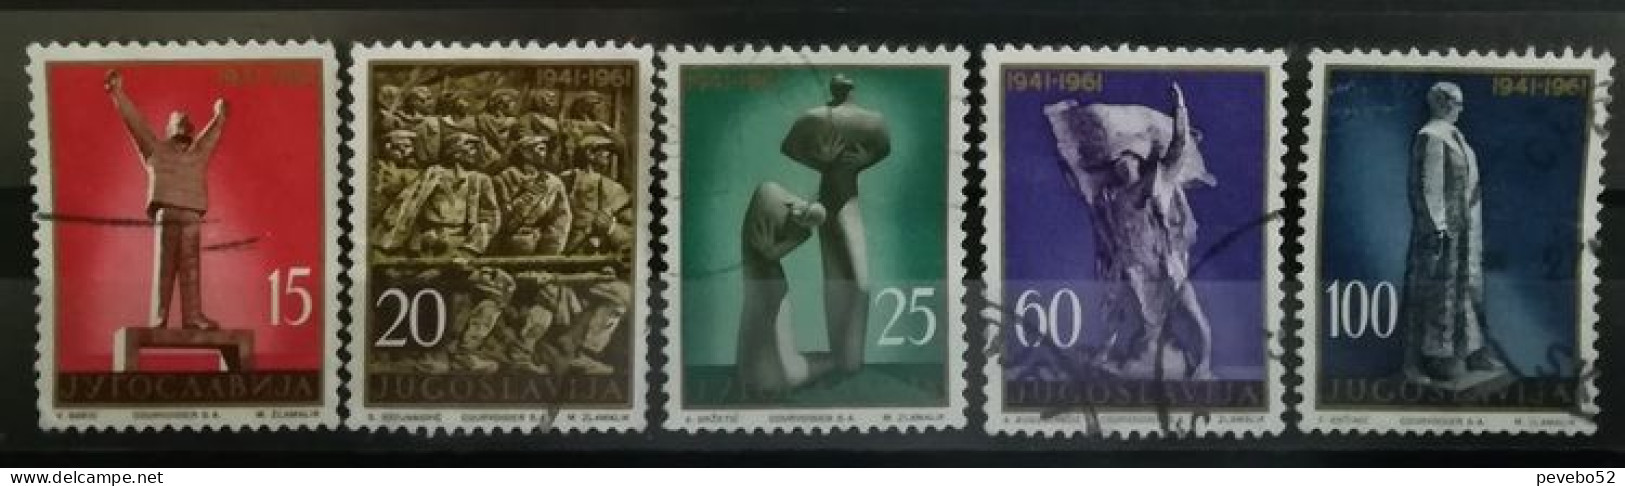 YUGOSLAVIA 1961 The 20th Anniversary Of The Uprising Against Occupation USED - Used Stamps